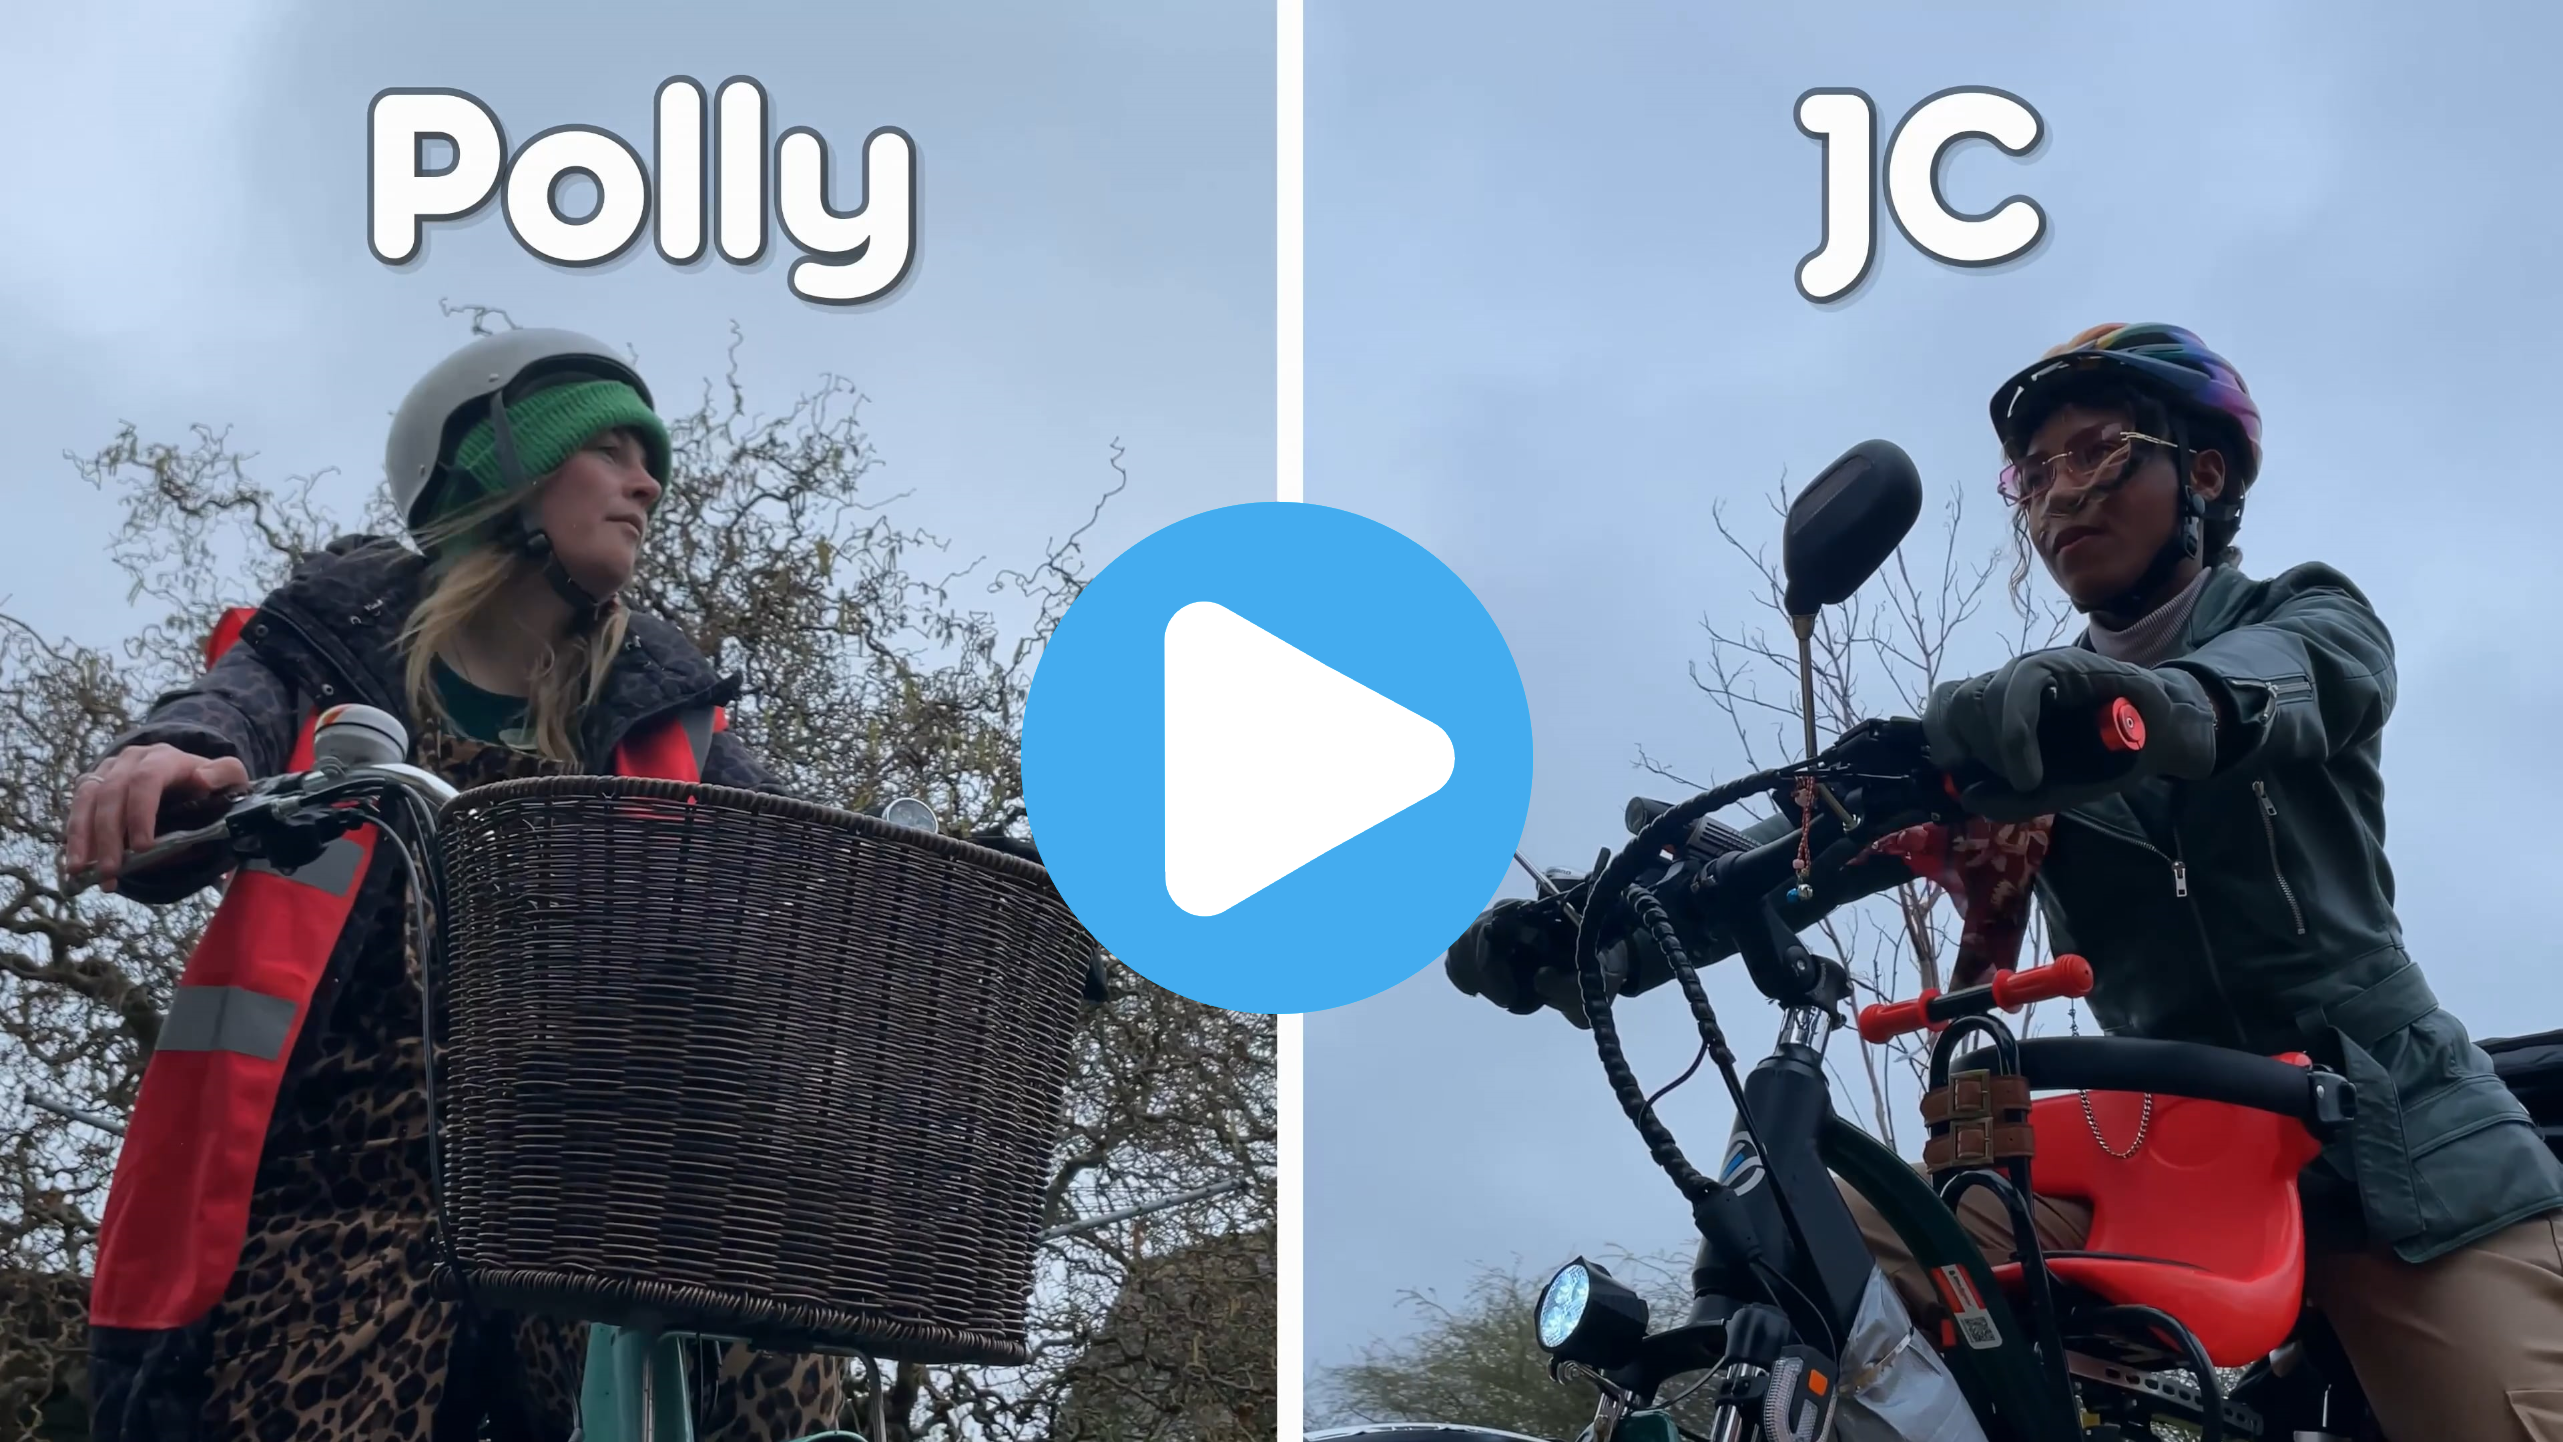 Polly and JC video v play button.